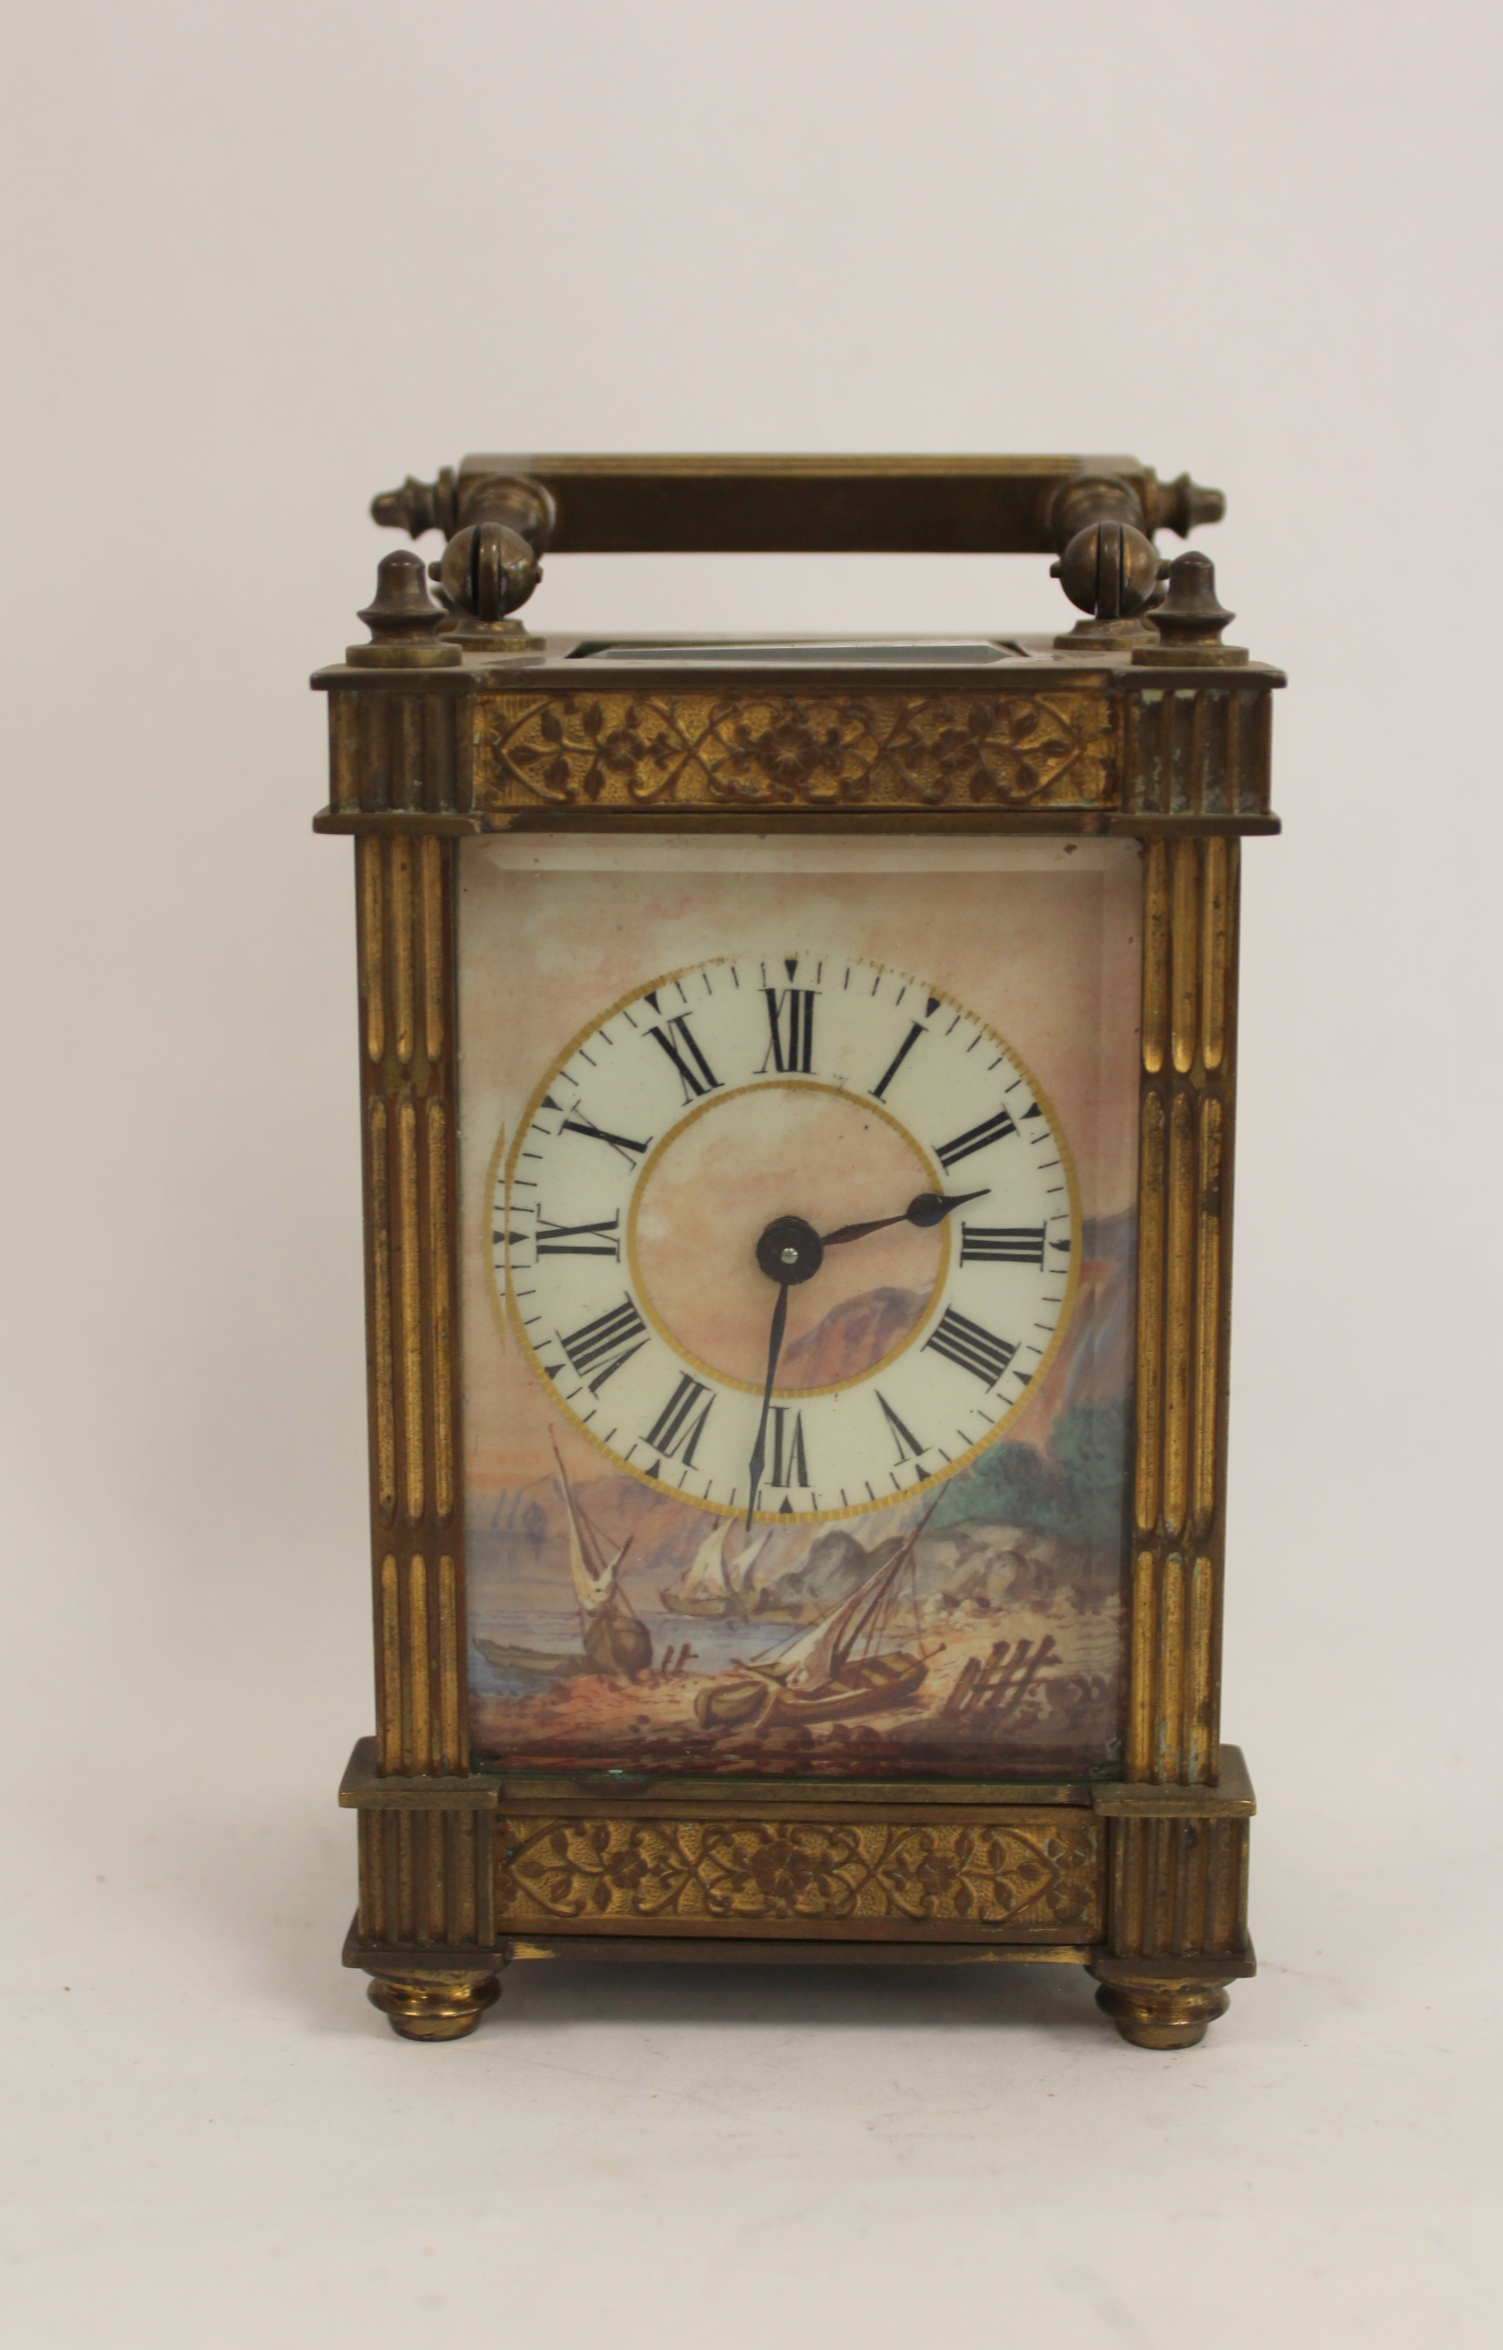 Cylinder carriage timepiece with painted and gilt porcelain dial depicting a coastal scene with